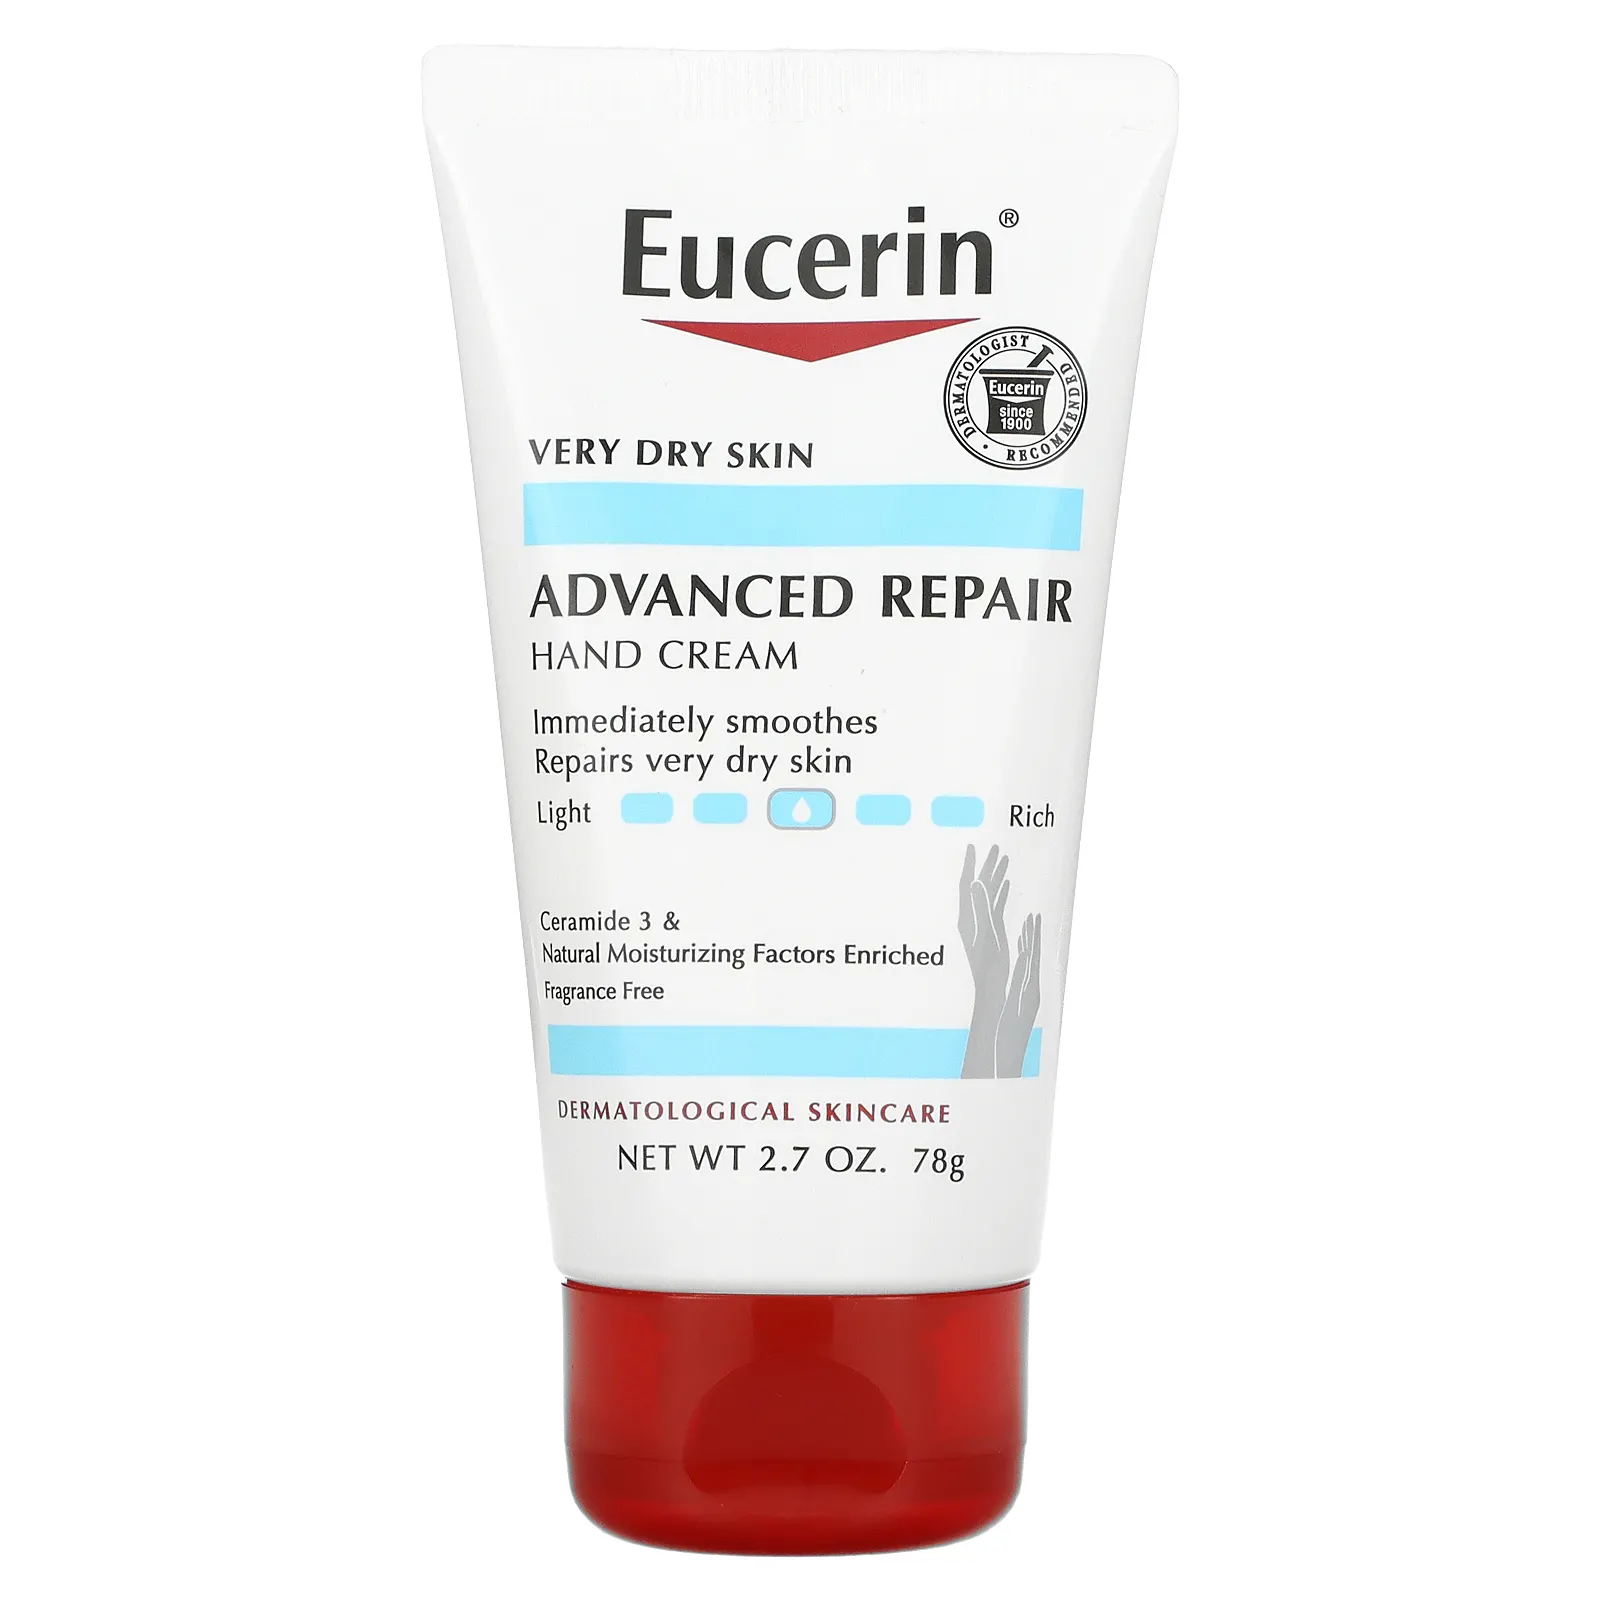 Advanced Repair Hand Cream by Eucerin, immediately smoothes & repairs very dry hands.